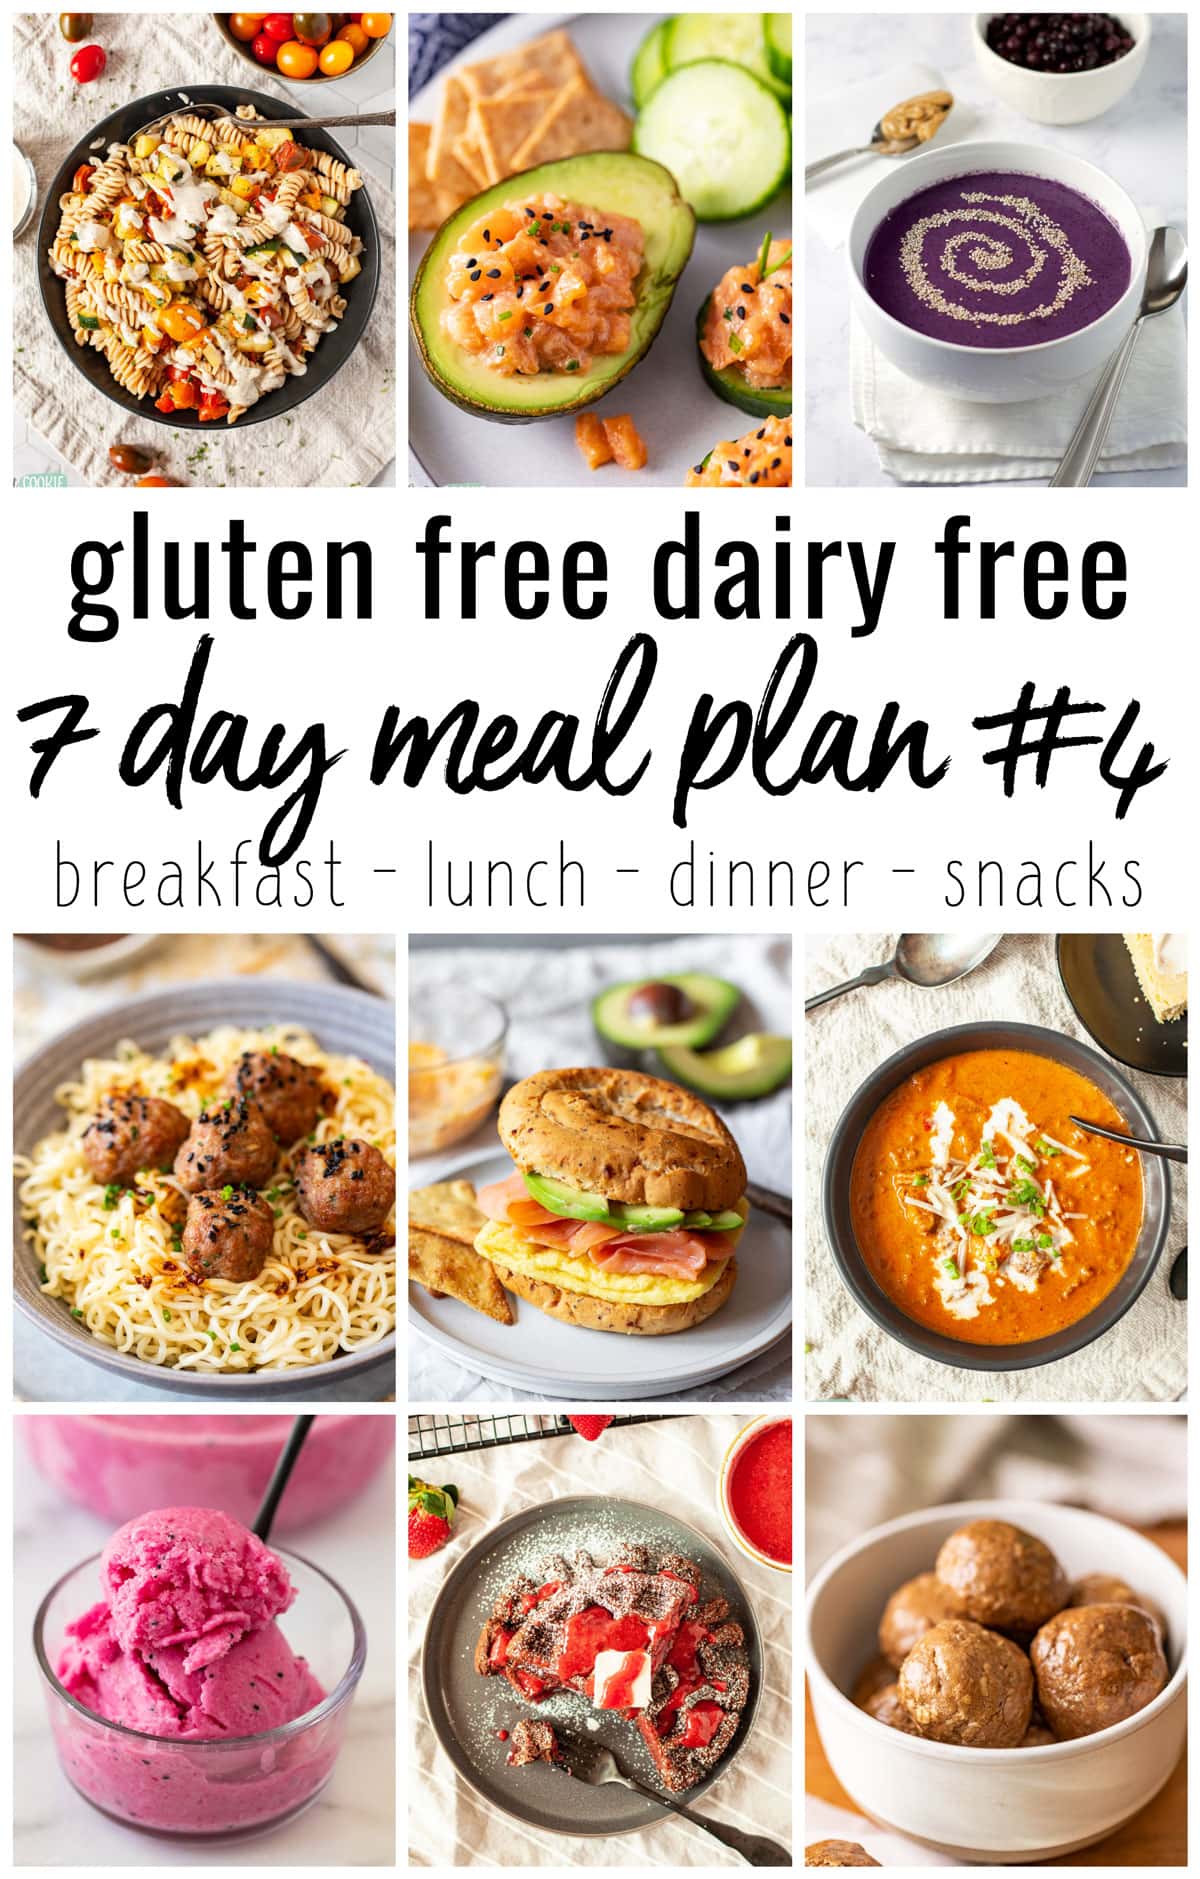 photo collage showing recipes that are in our gluten free 7 day meal plan.